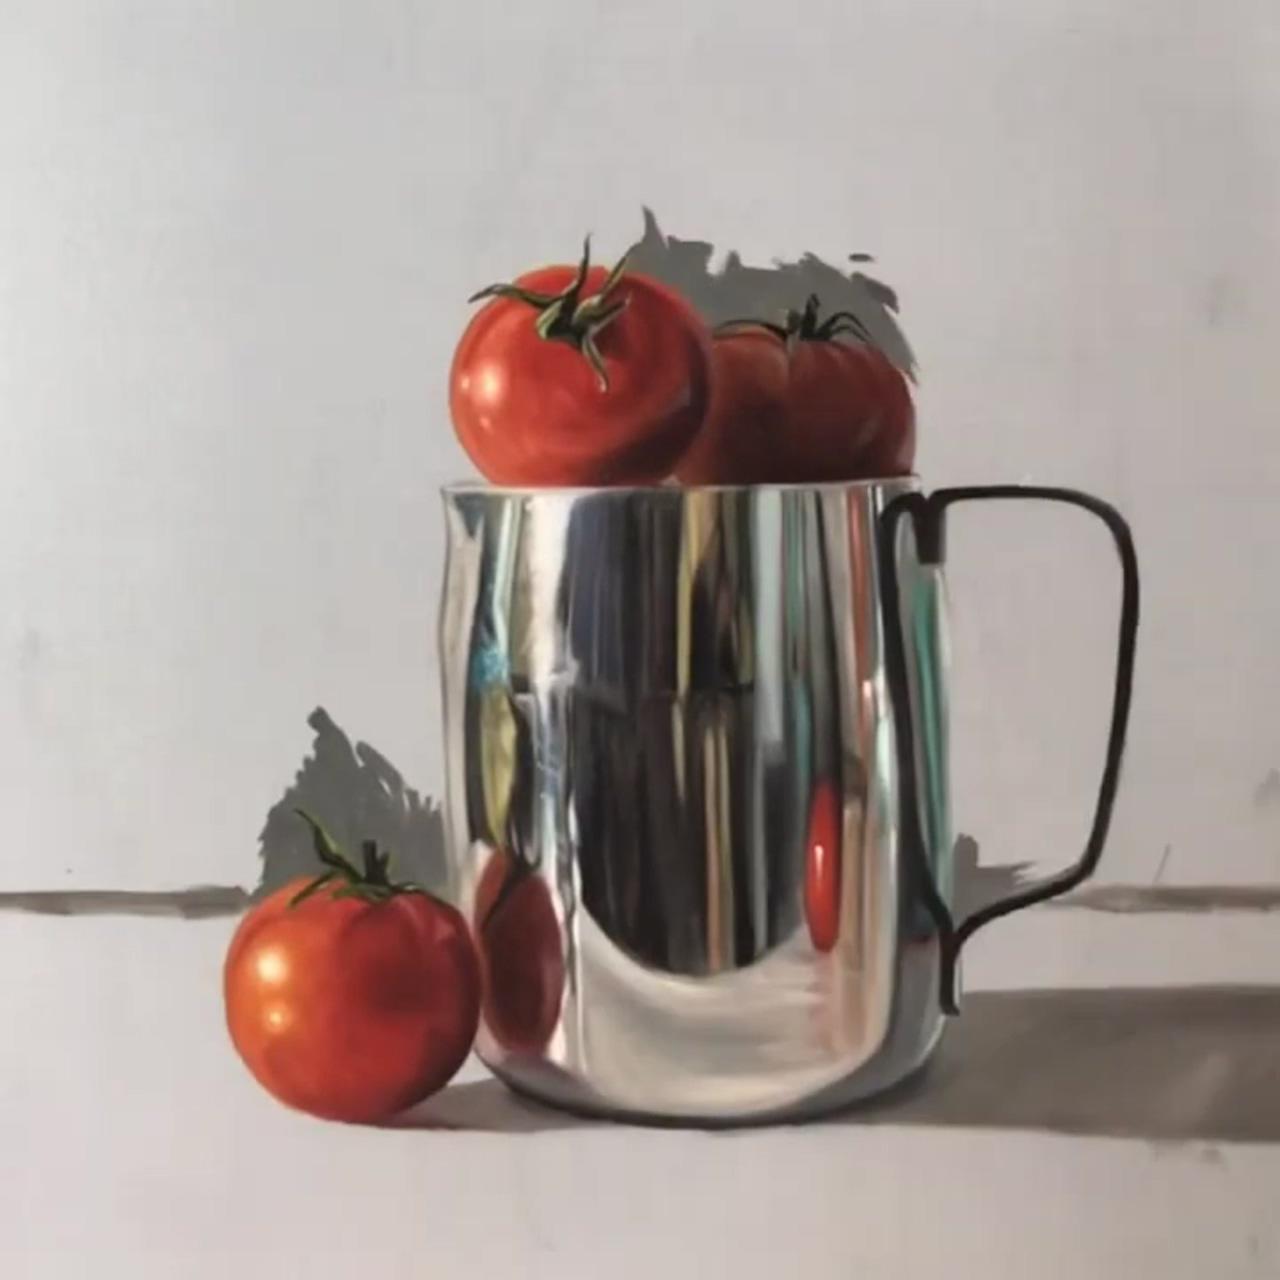 Time-lapse oil painting, tomatoes and reflective cream pitcher | oil painting basics